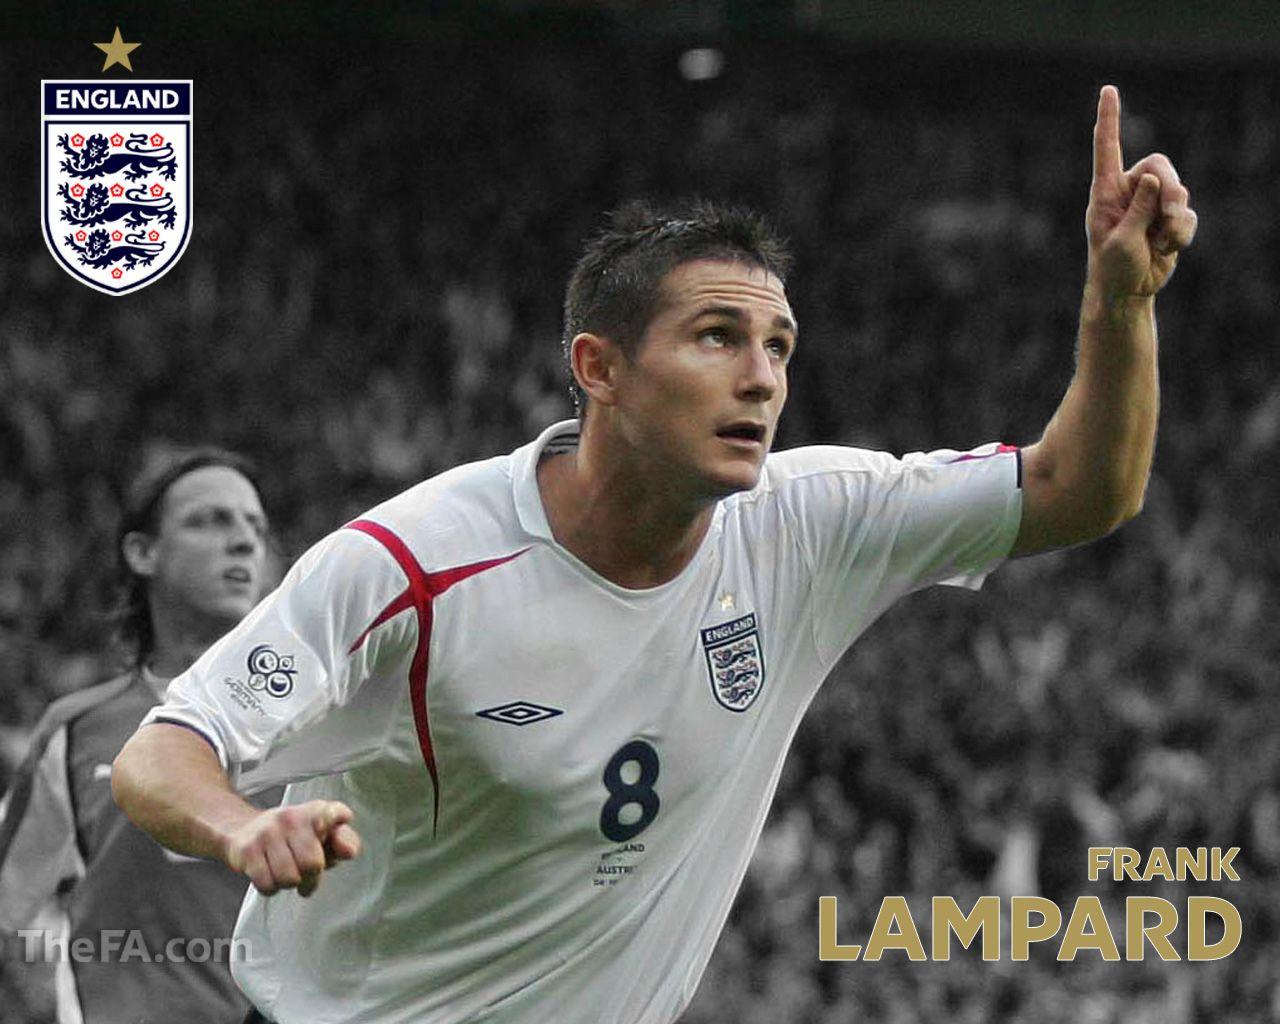 Frank Lampard Football Picture Free Wallpaper